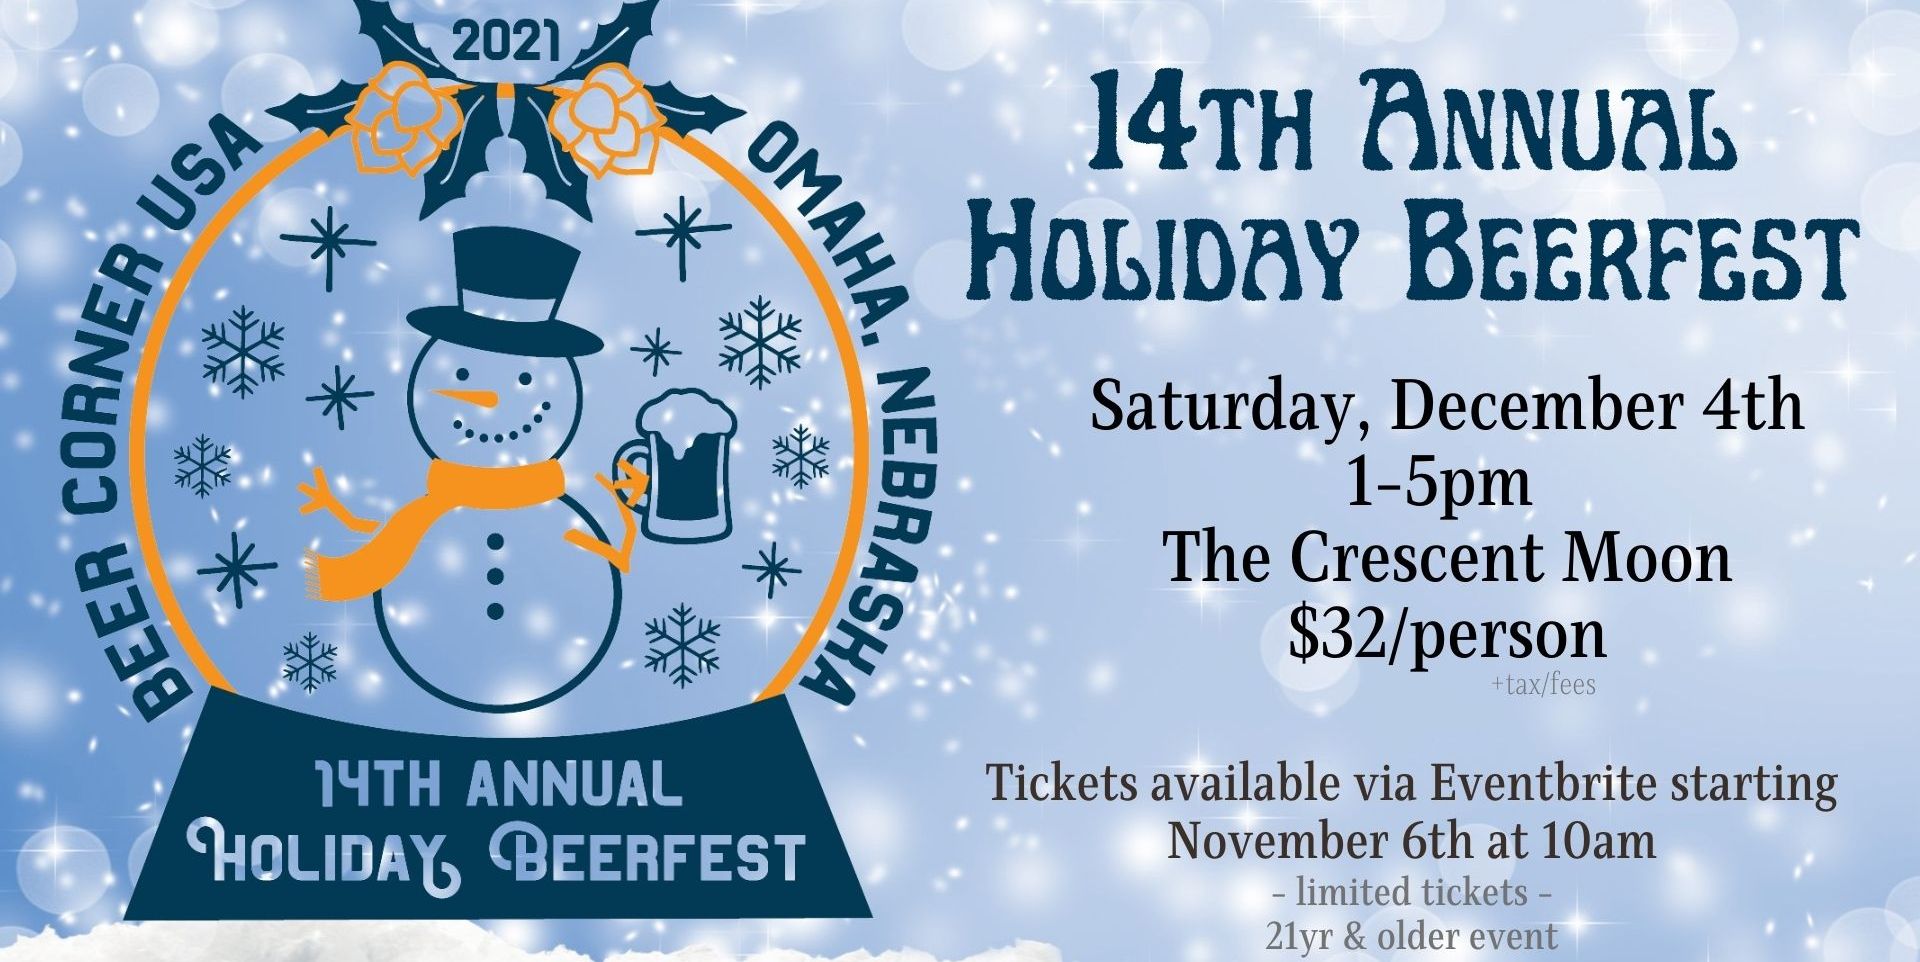 14th Annual Holiday Beerfest promotional image